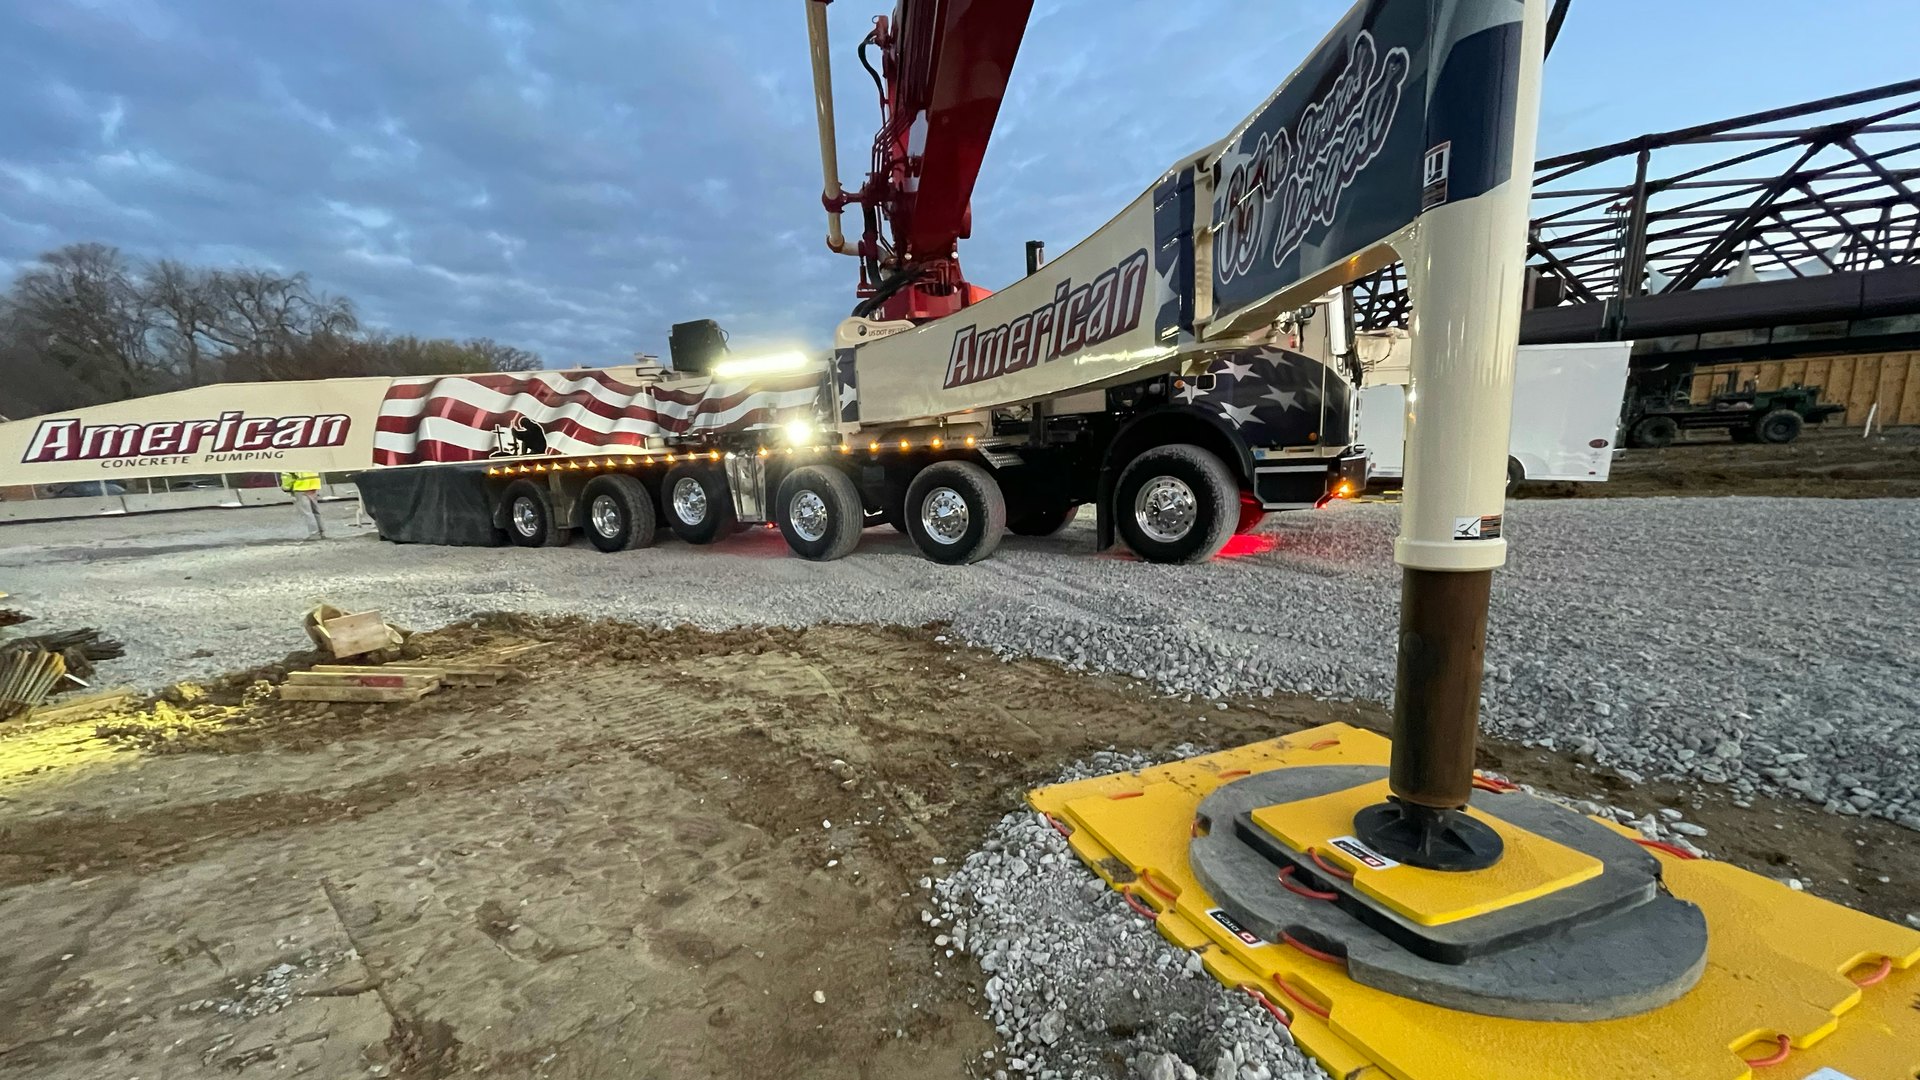 The Role of Dunnage and Outrigger Pads in Concrete Pump Truck Safety